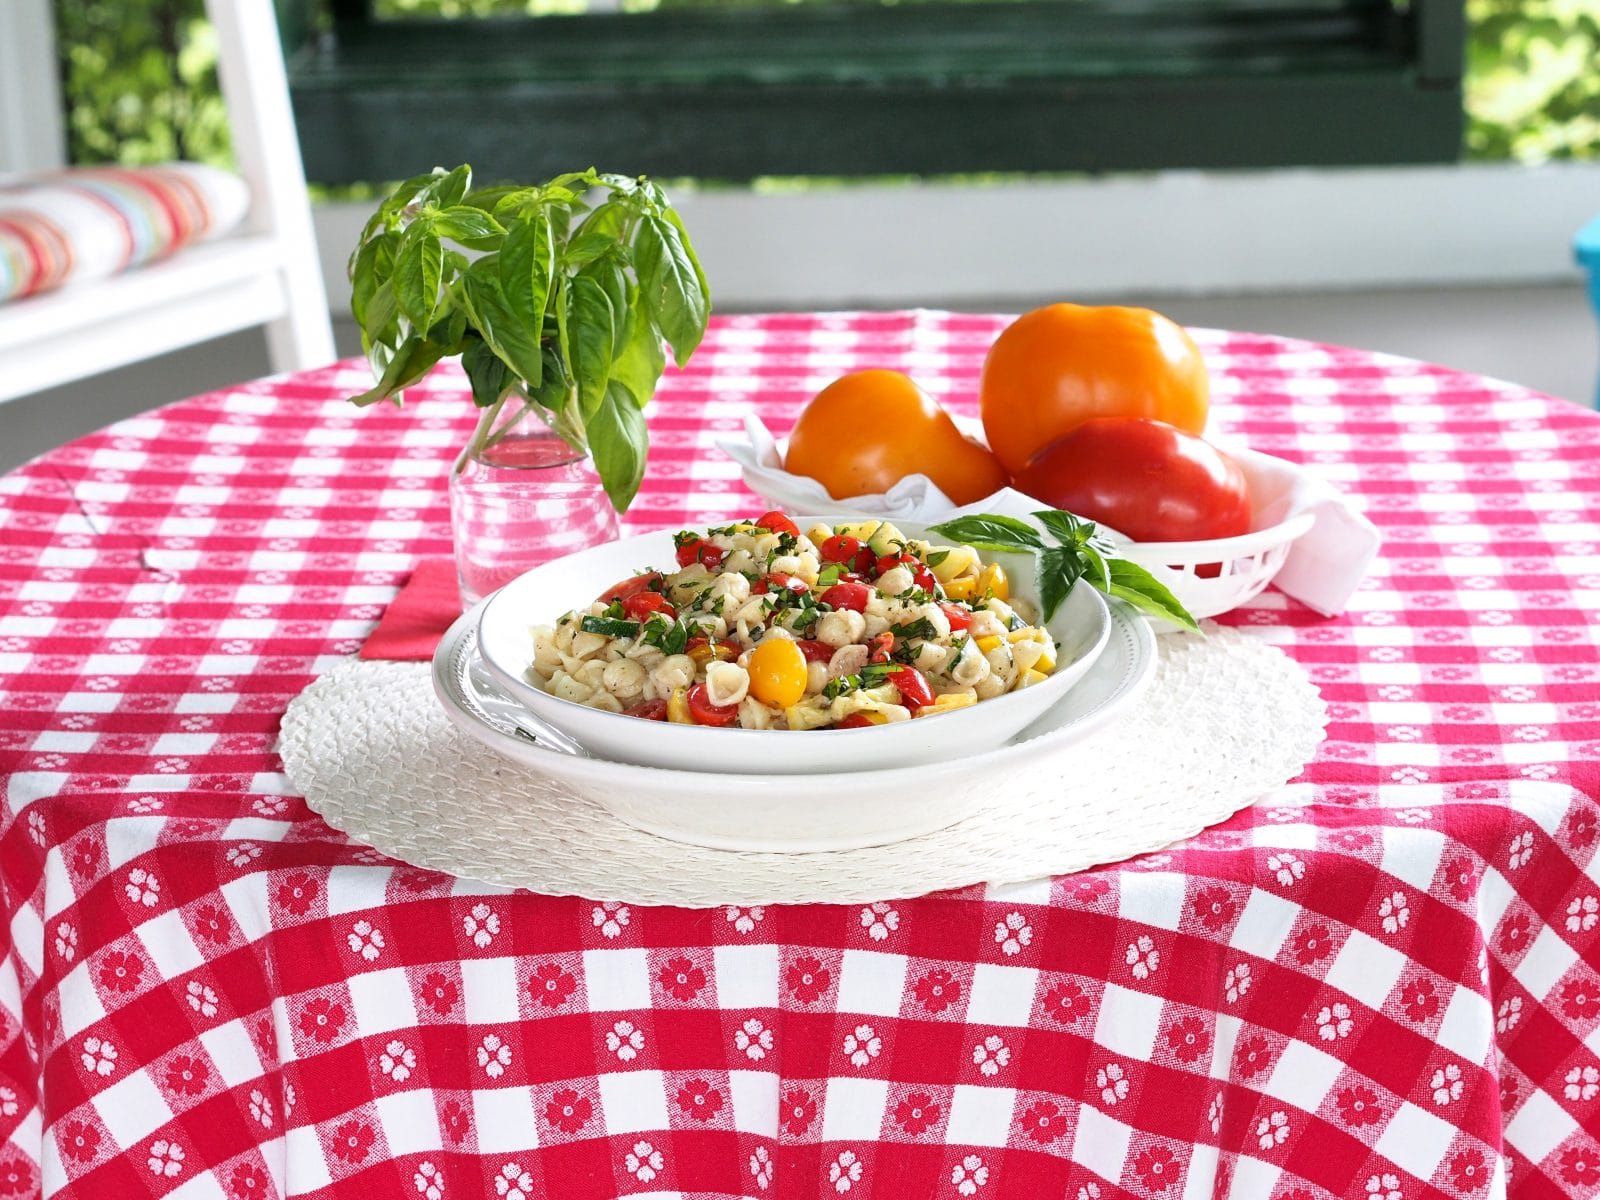 Summer Pasta Salad with Boursin is a flavor-packed pasta salad including zucchini, yellow squash, tomatoes, basil and Boursin cheese. Make for a whole meal or a side.